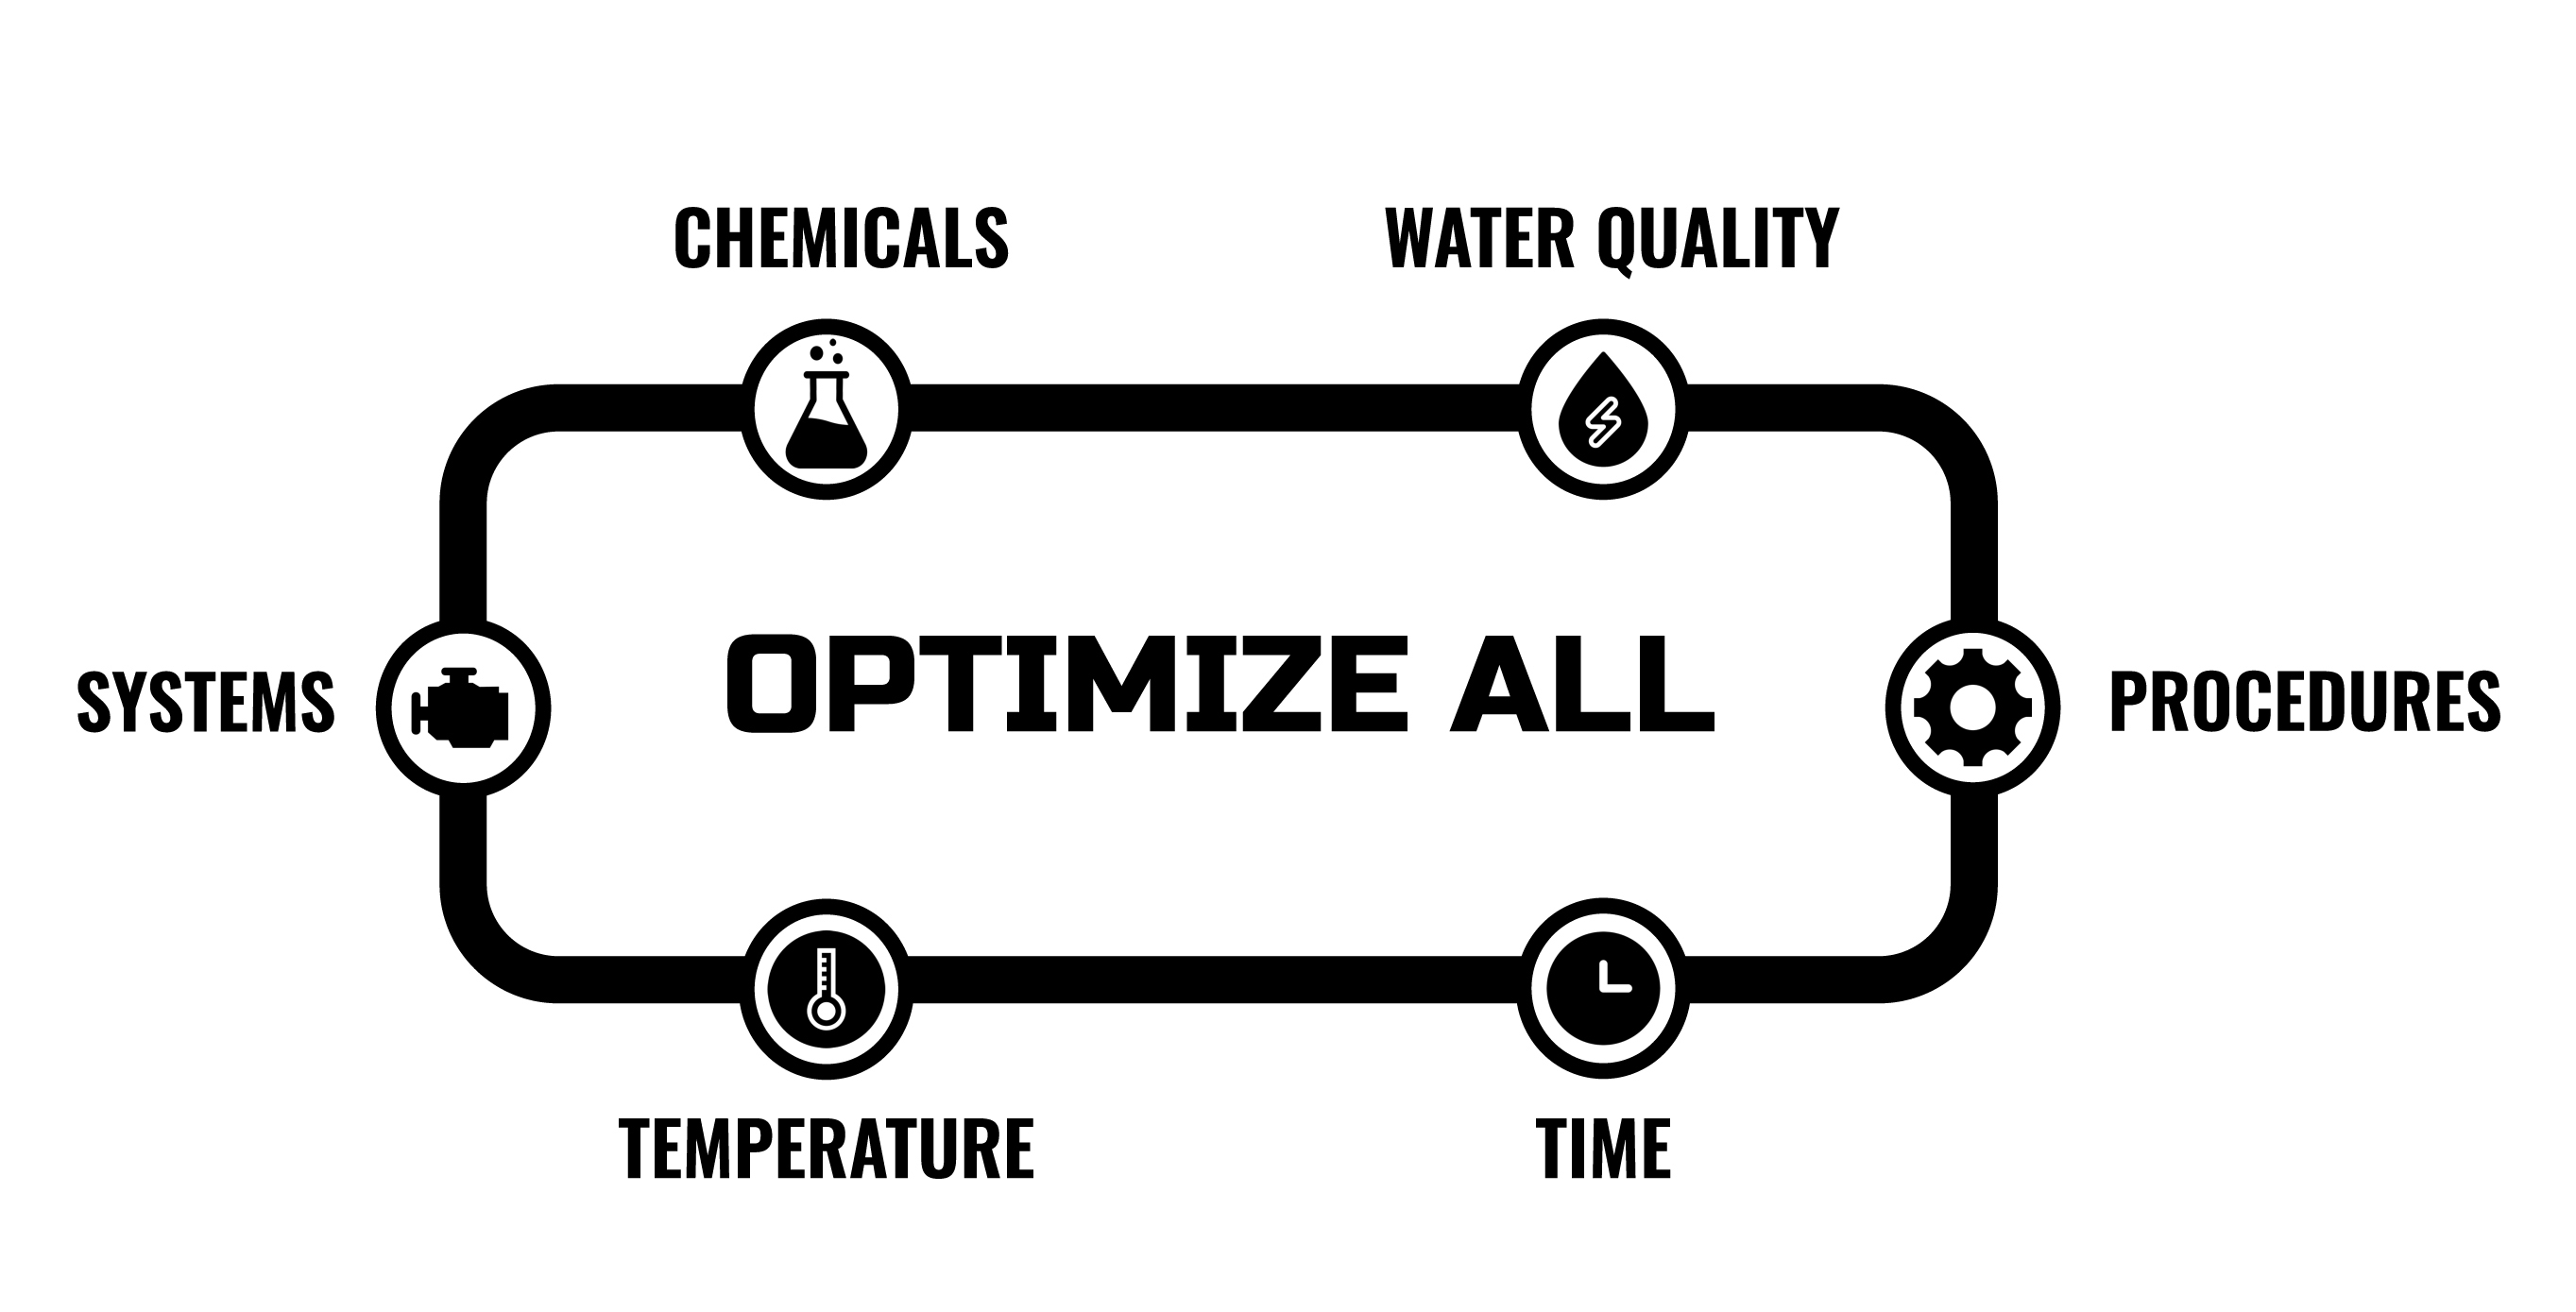 How to Optimize Wash Quality at a Modern-Day Professional Car Wash